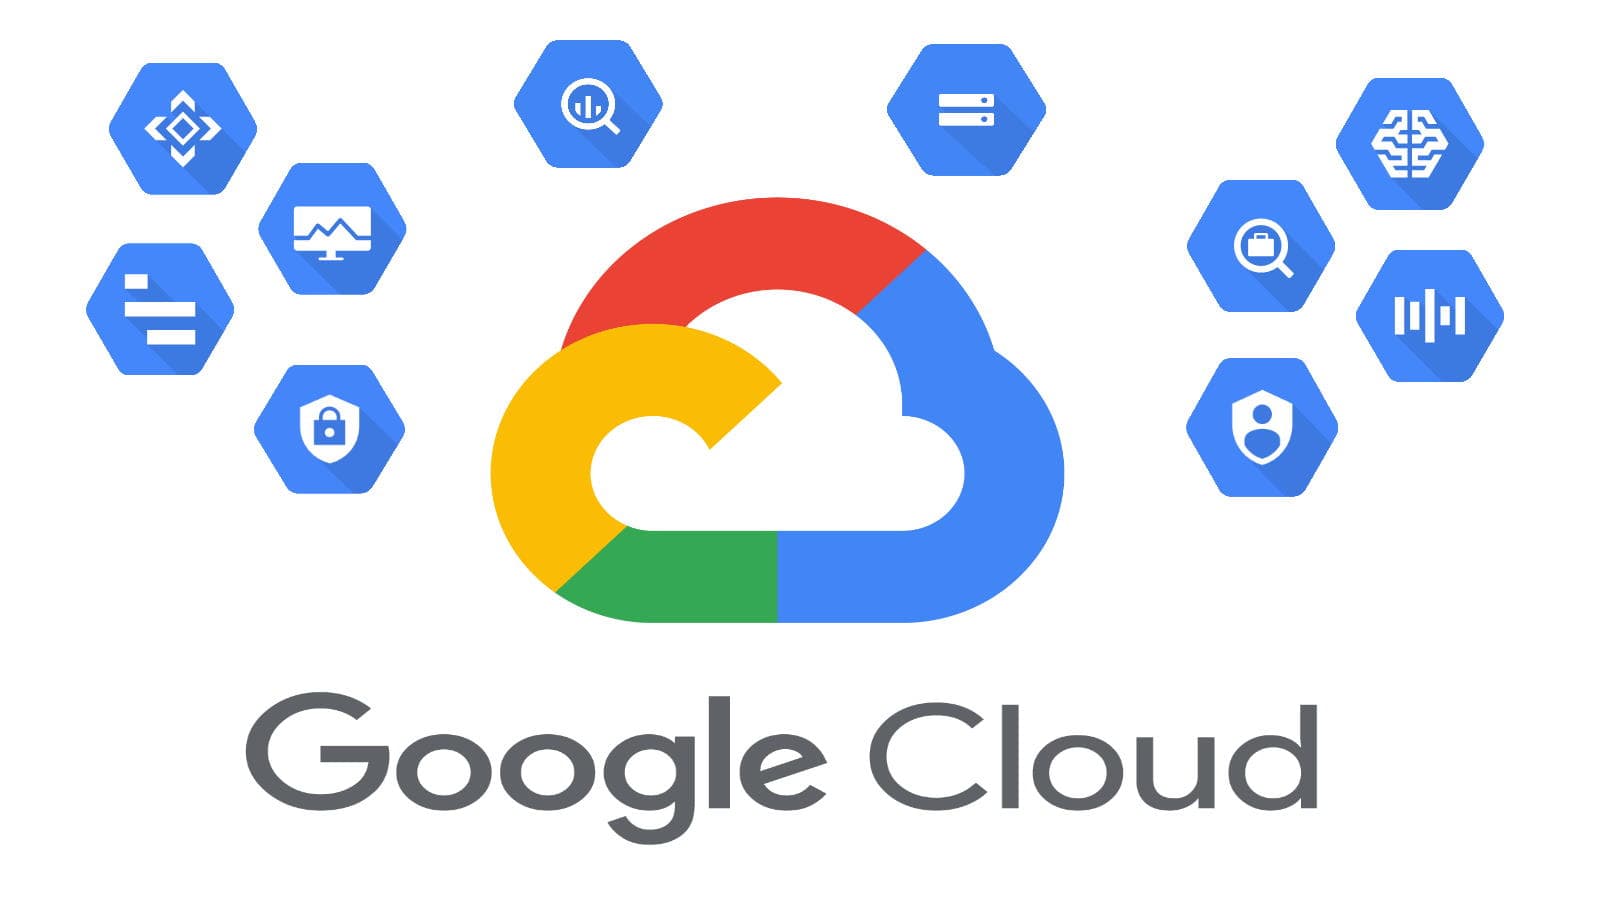 At MWC 2023, Google Cloud targets cloud-native network transformation